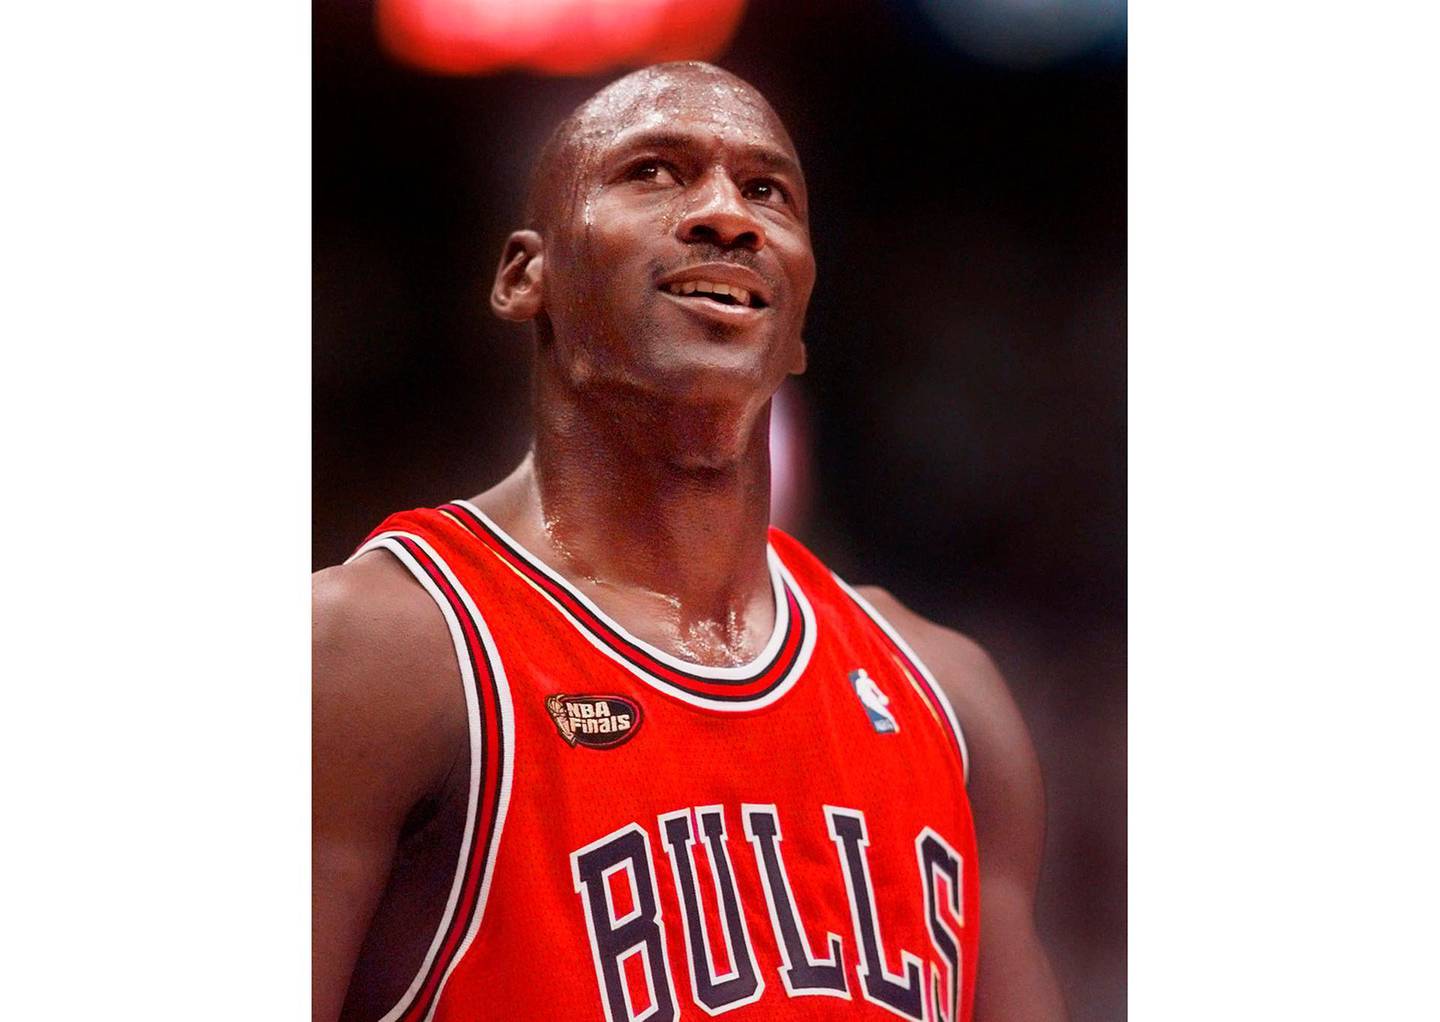 FILE -This June 14, 1998 file photo shows Chicago Bulls' Michael Jordan looking up at the score during the third quarter of their NBA Finals game against the Utah Jazz in Salt Lake City. â€œThe Last Dance,â€ ESPNâ€™s docuseries detailing the 1998 and final season of the Chicago Bulls championship dynasty, has served as a reminder to basketball fans of the greatness of Michael Jordan on the court. It also shed light on his worldwide marketing allure. (AP Photo/Mark J. Terrill, File)